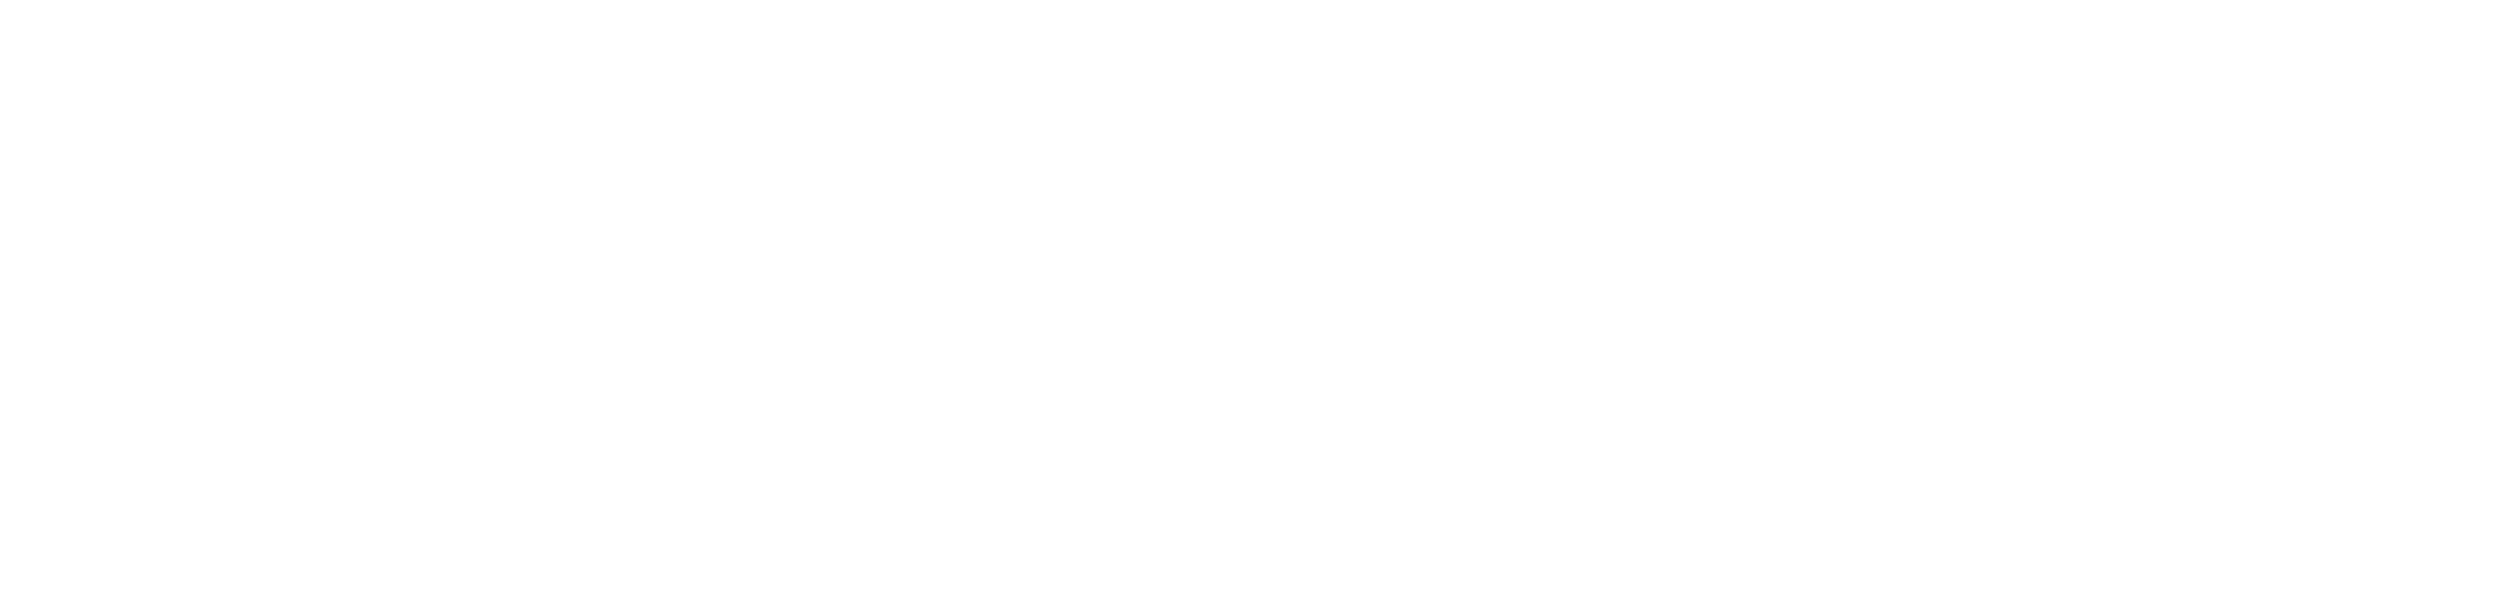 Ethical sourcing Network